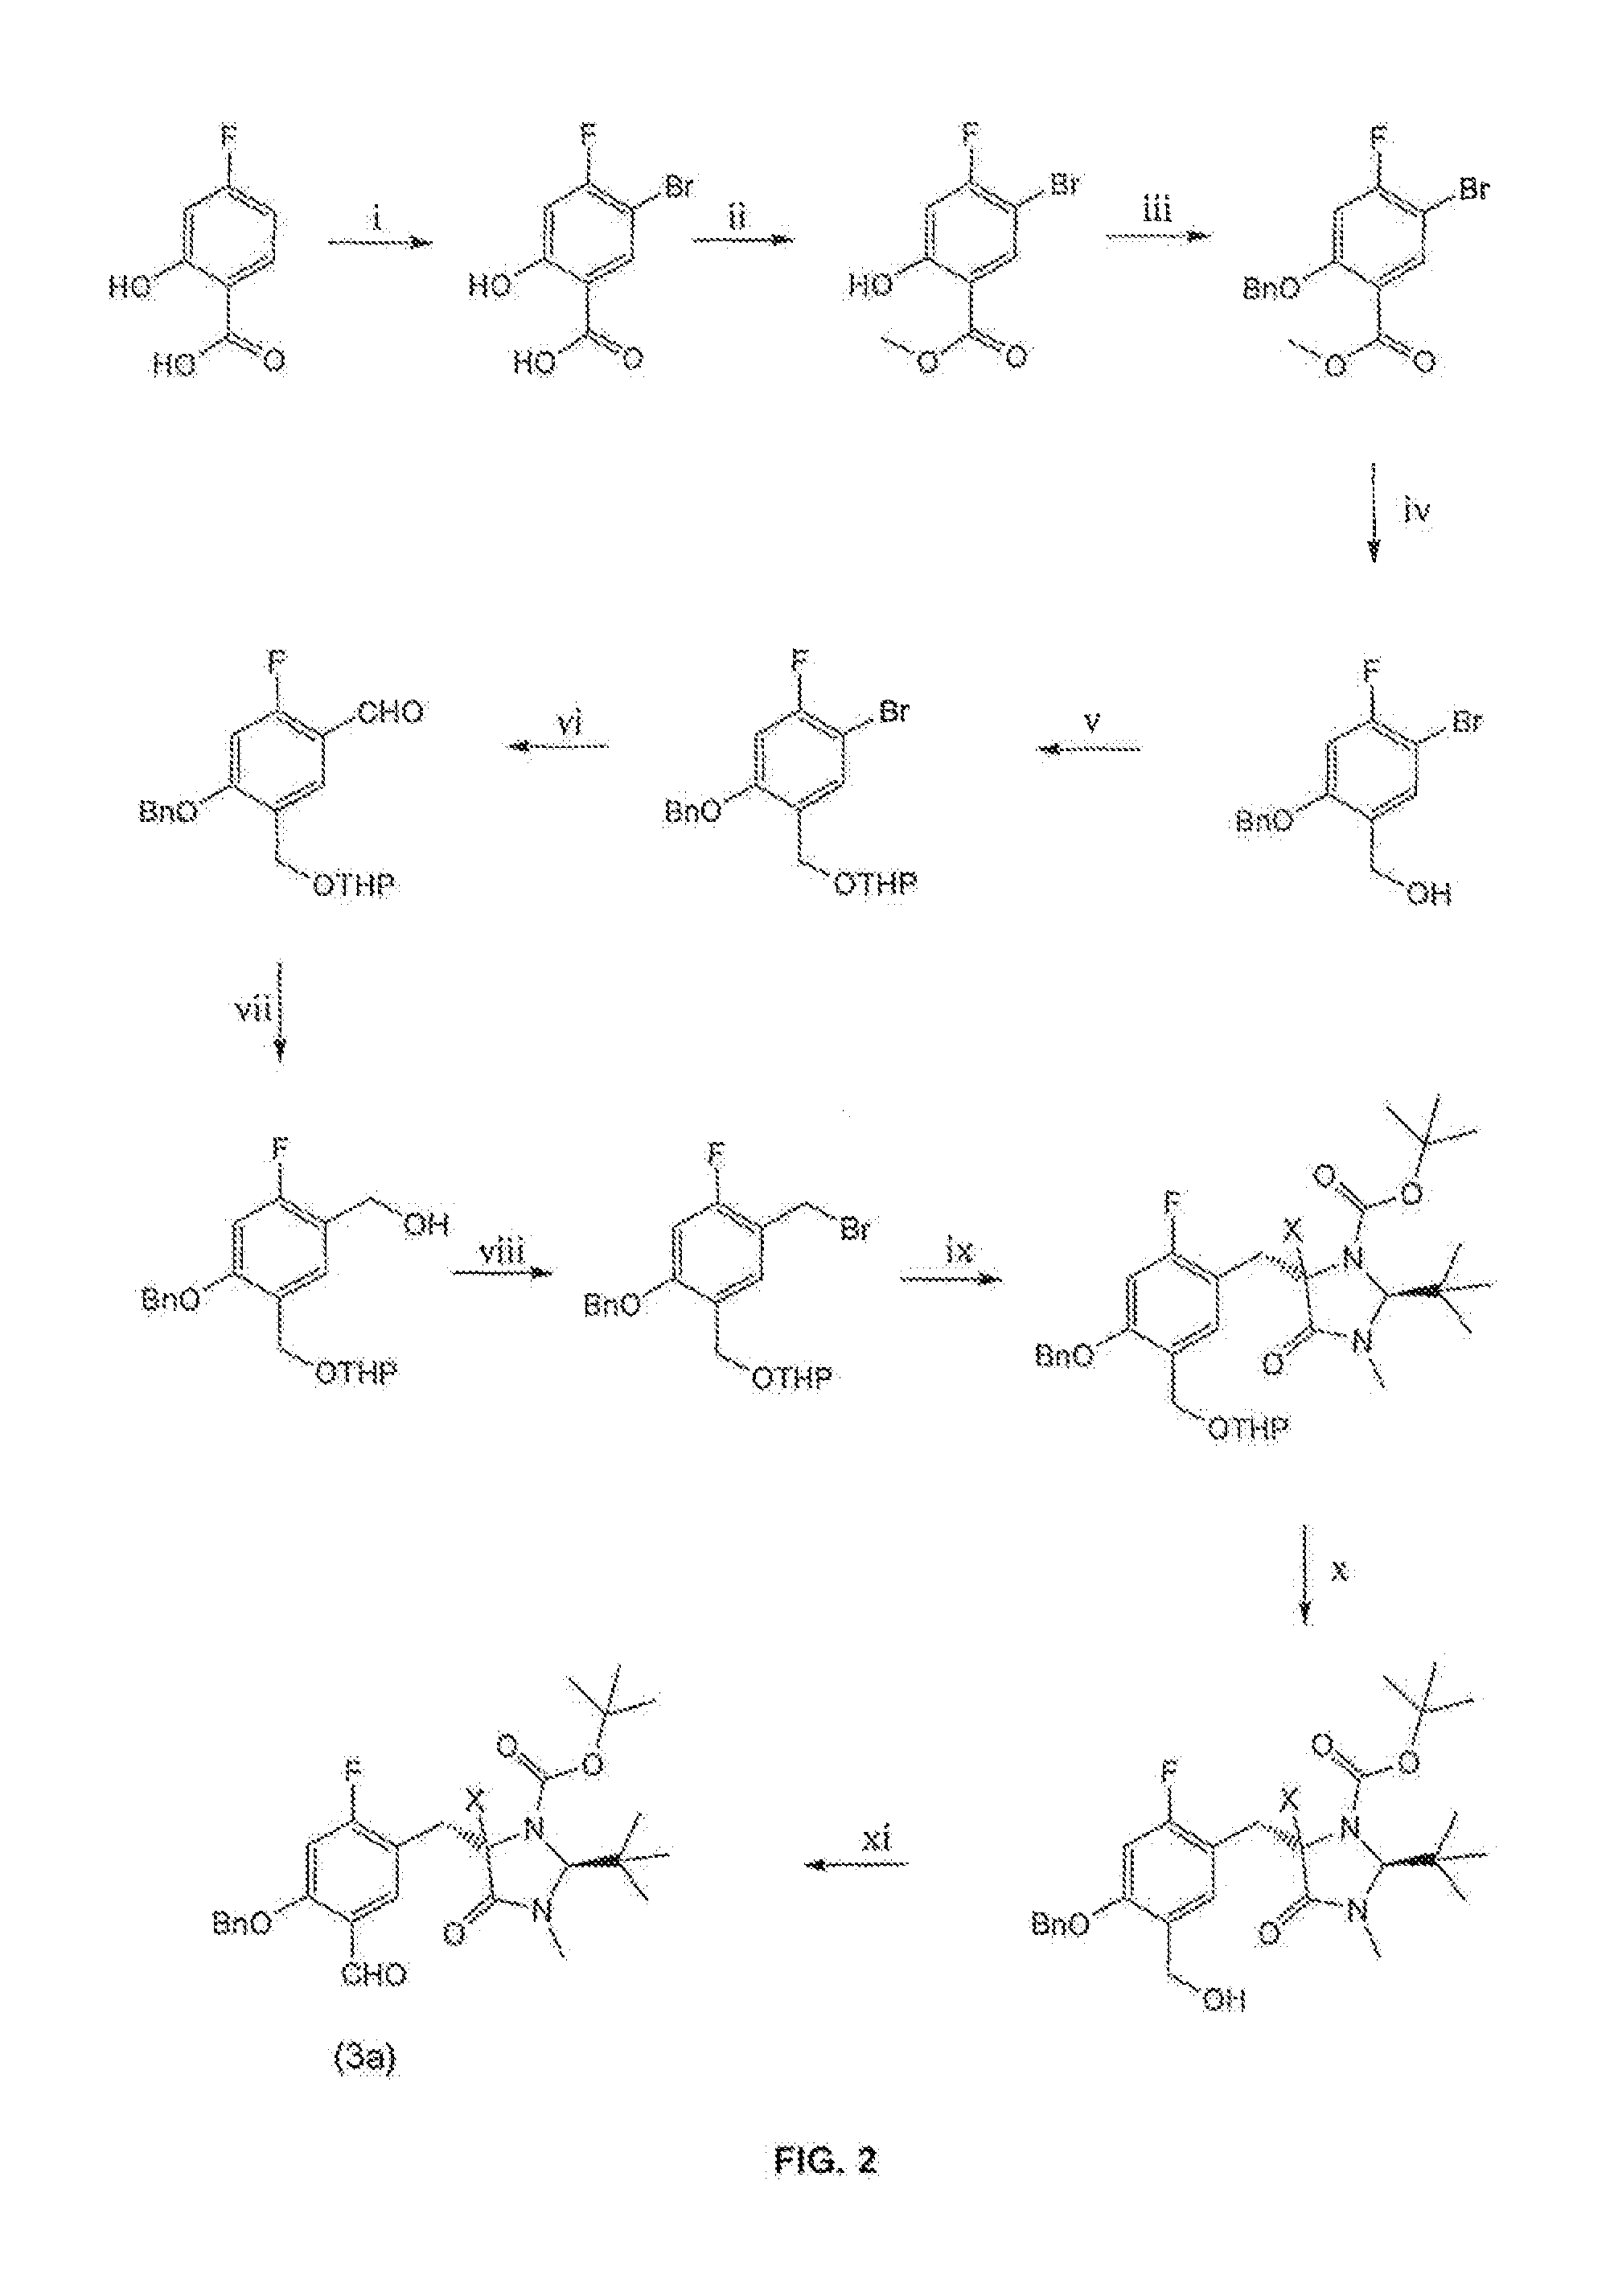 Method for producing precursors for l-3,4-dihydroxy-6-[18f]fluorophenylalanine and 2-[18f]fluoro-l-tyrosine and the a-methylated derivatives thereof, precursor, and method for producing l-3,4dihydroxy-6-[18f]fluorophenylalanine and 2-[18f]fluoro-l-tyrosine and the a-methylated derivatives from the precursor